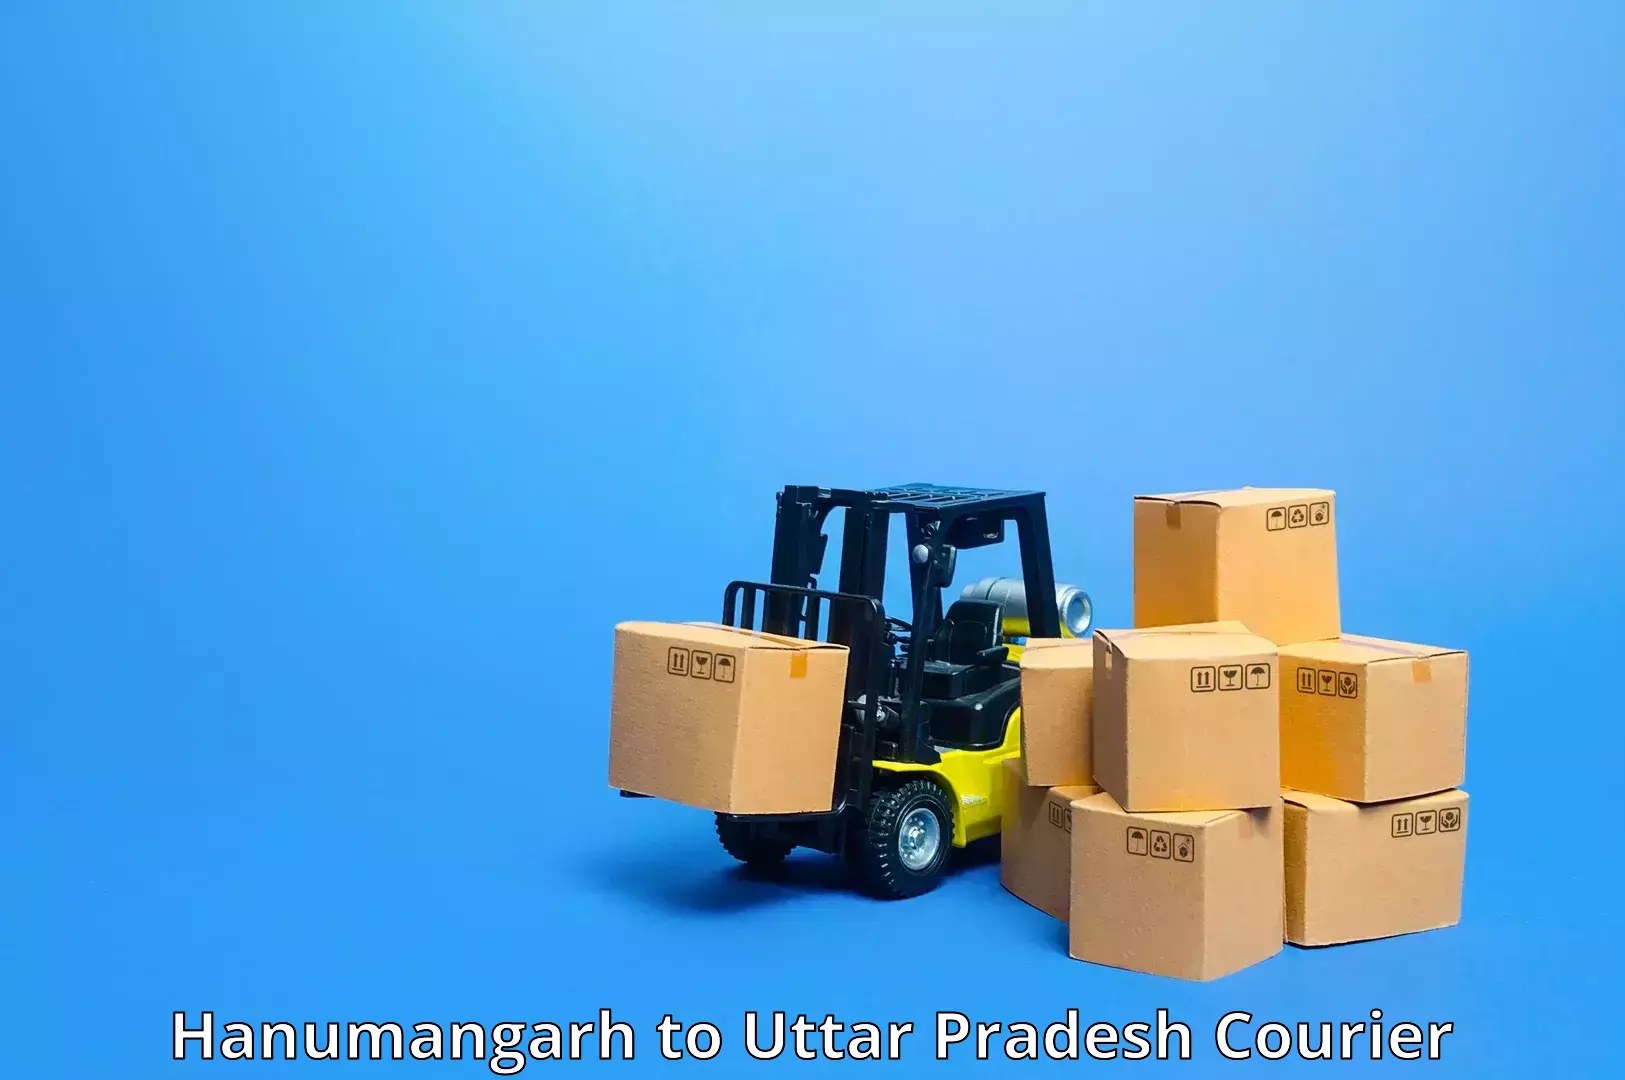 Efficient package consolidation Hanumangarh to Deoband